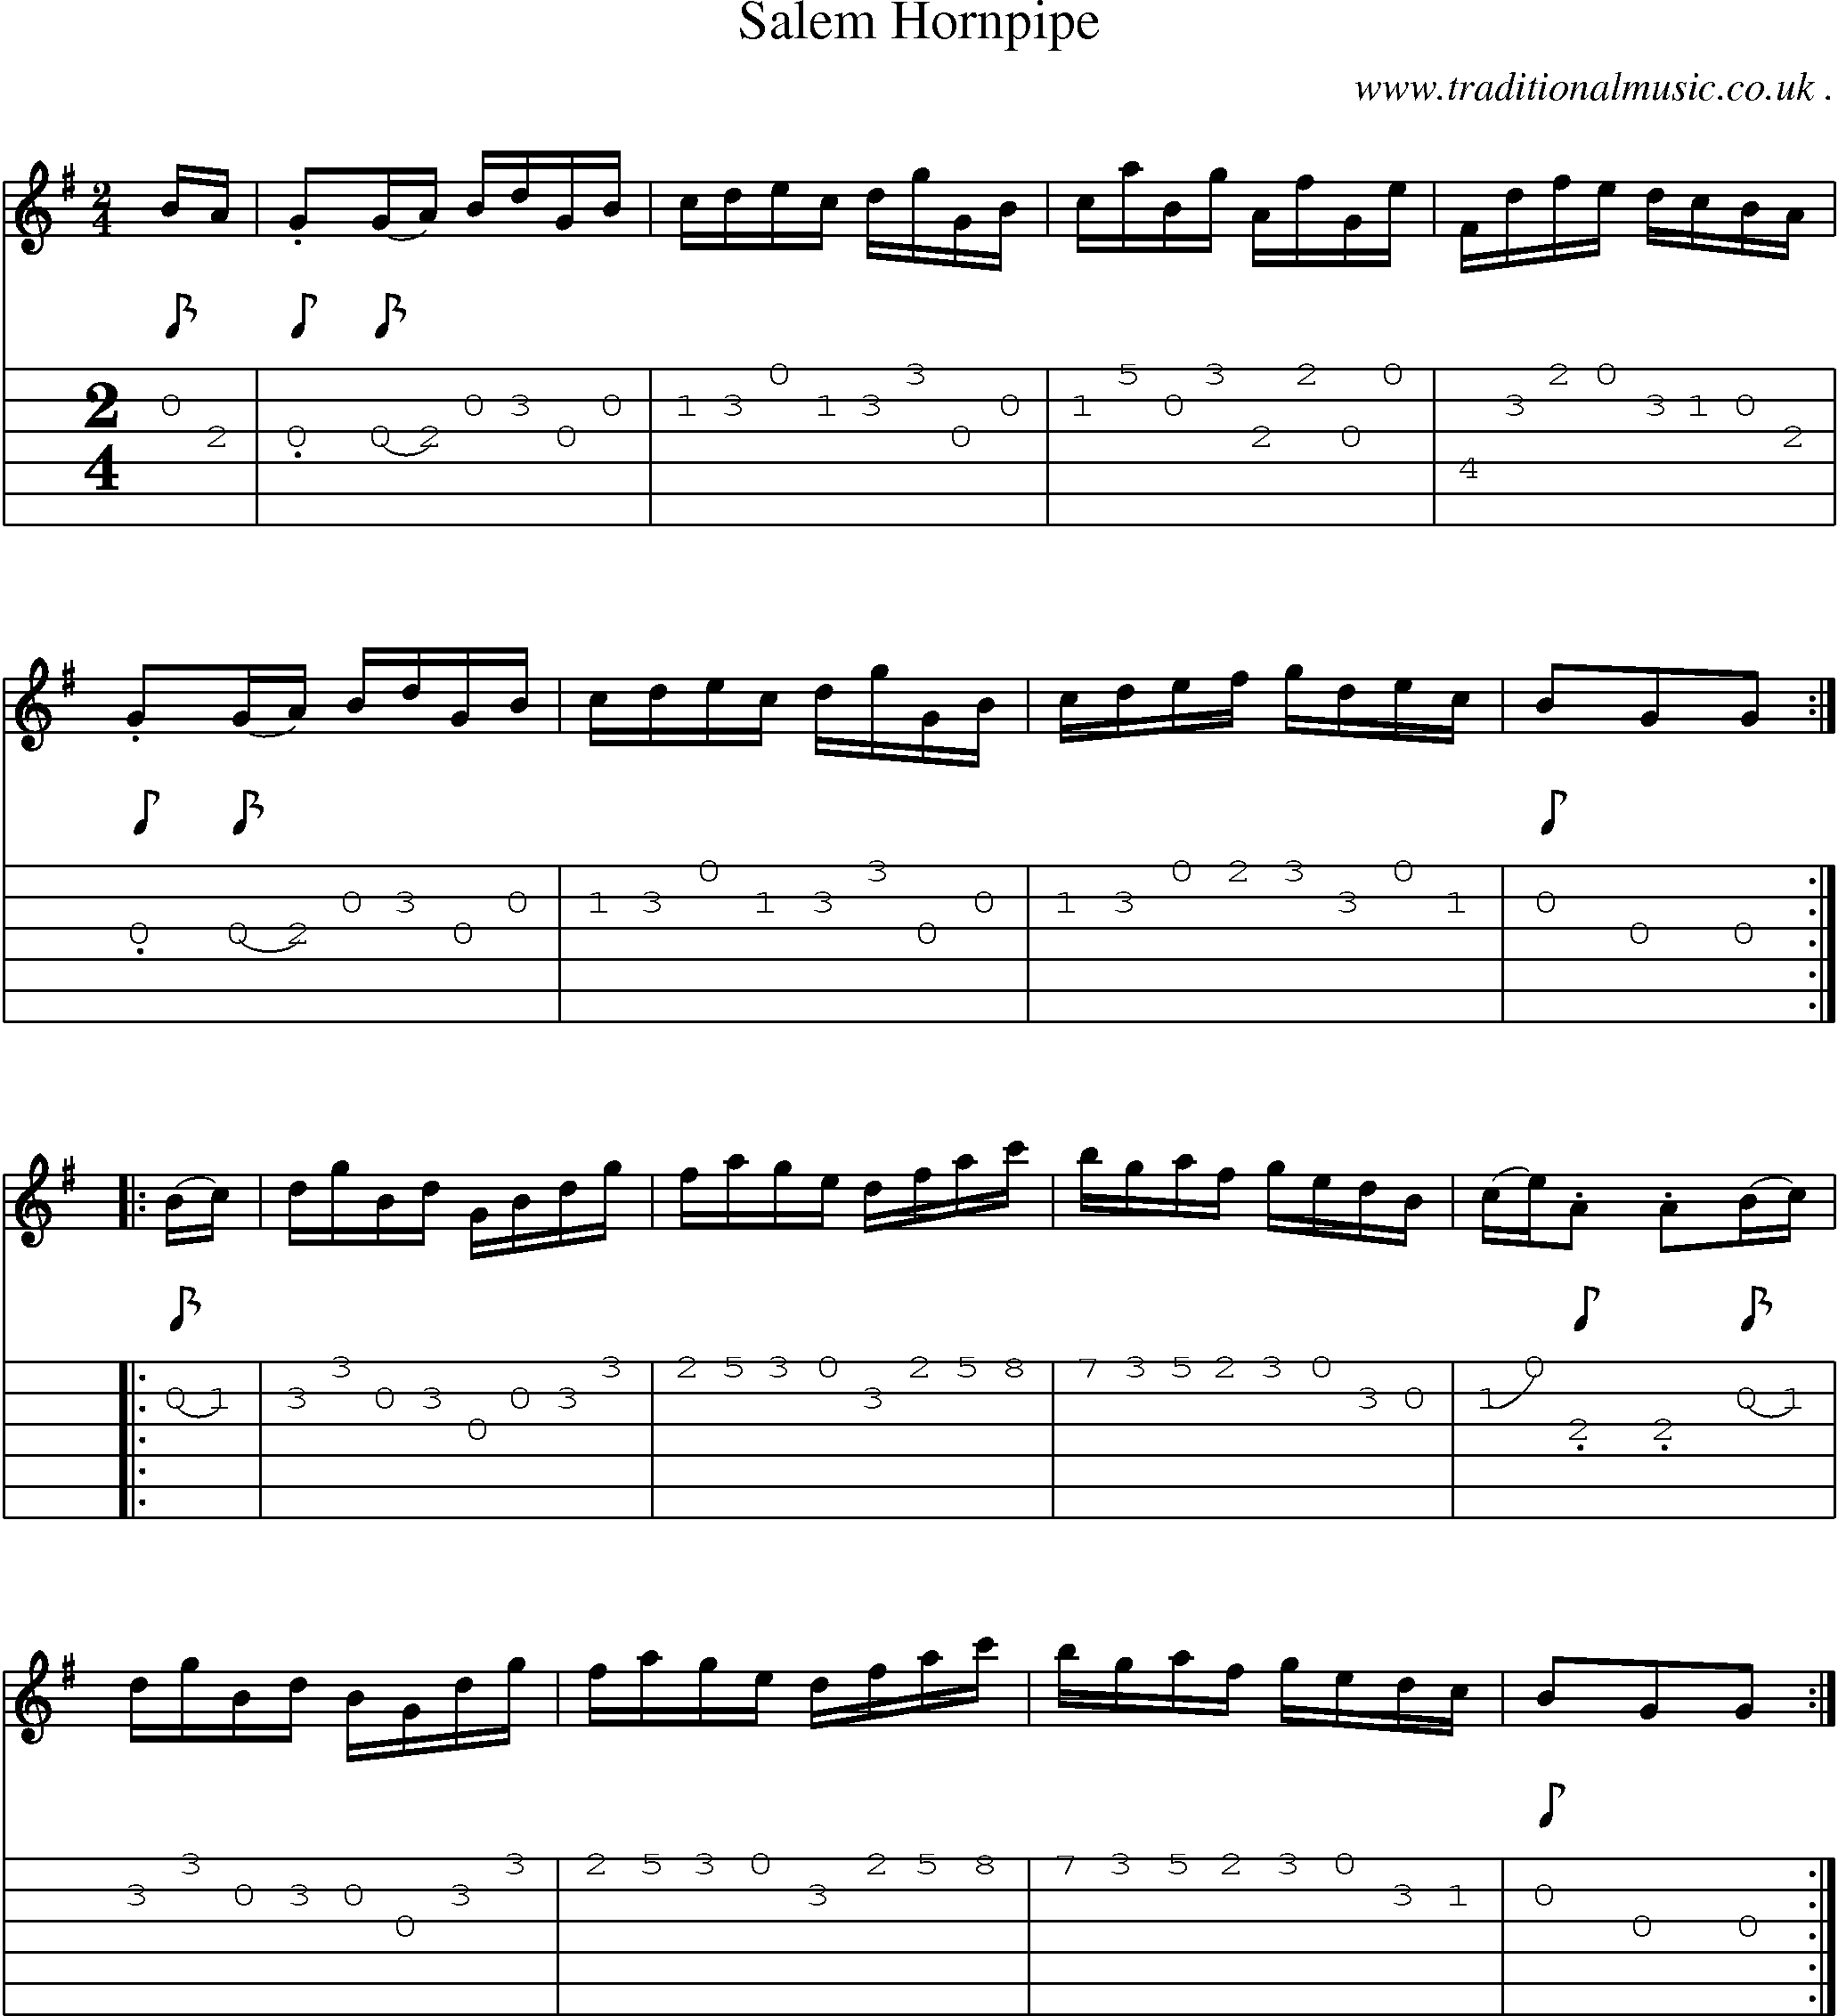 Sheet-Music and Guitar Tabs for Salem Hornpipe